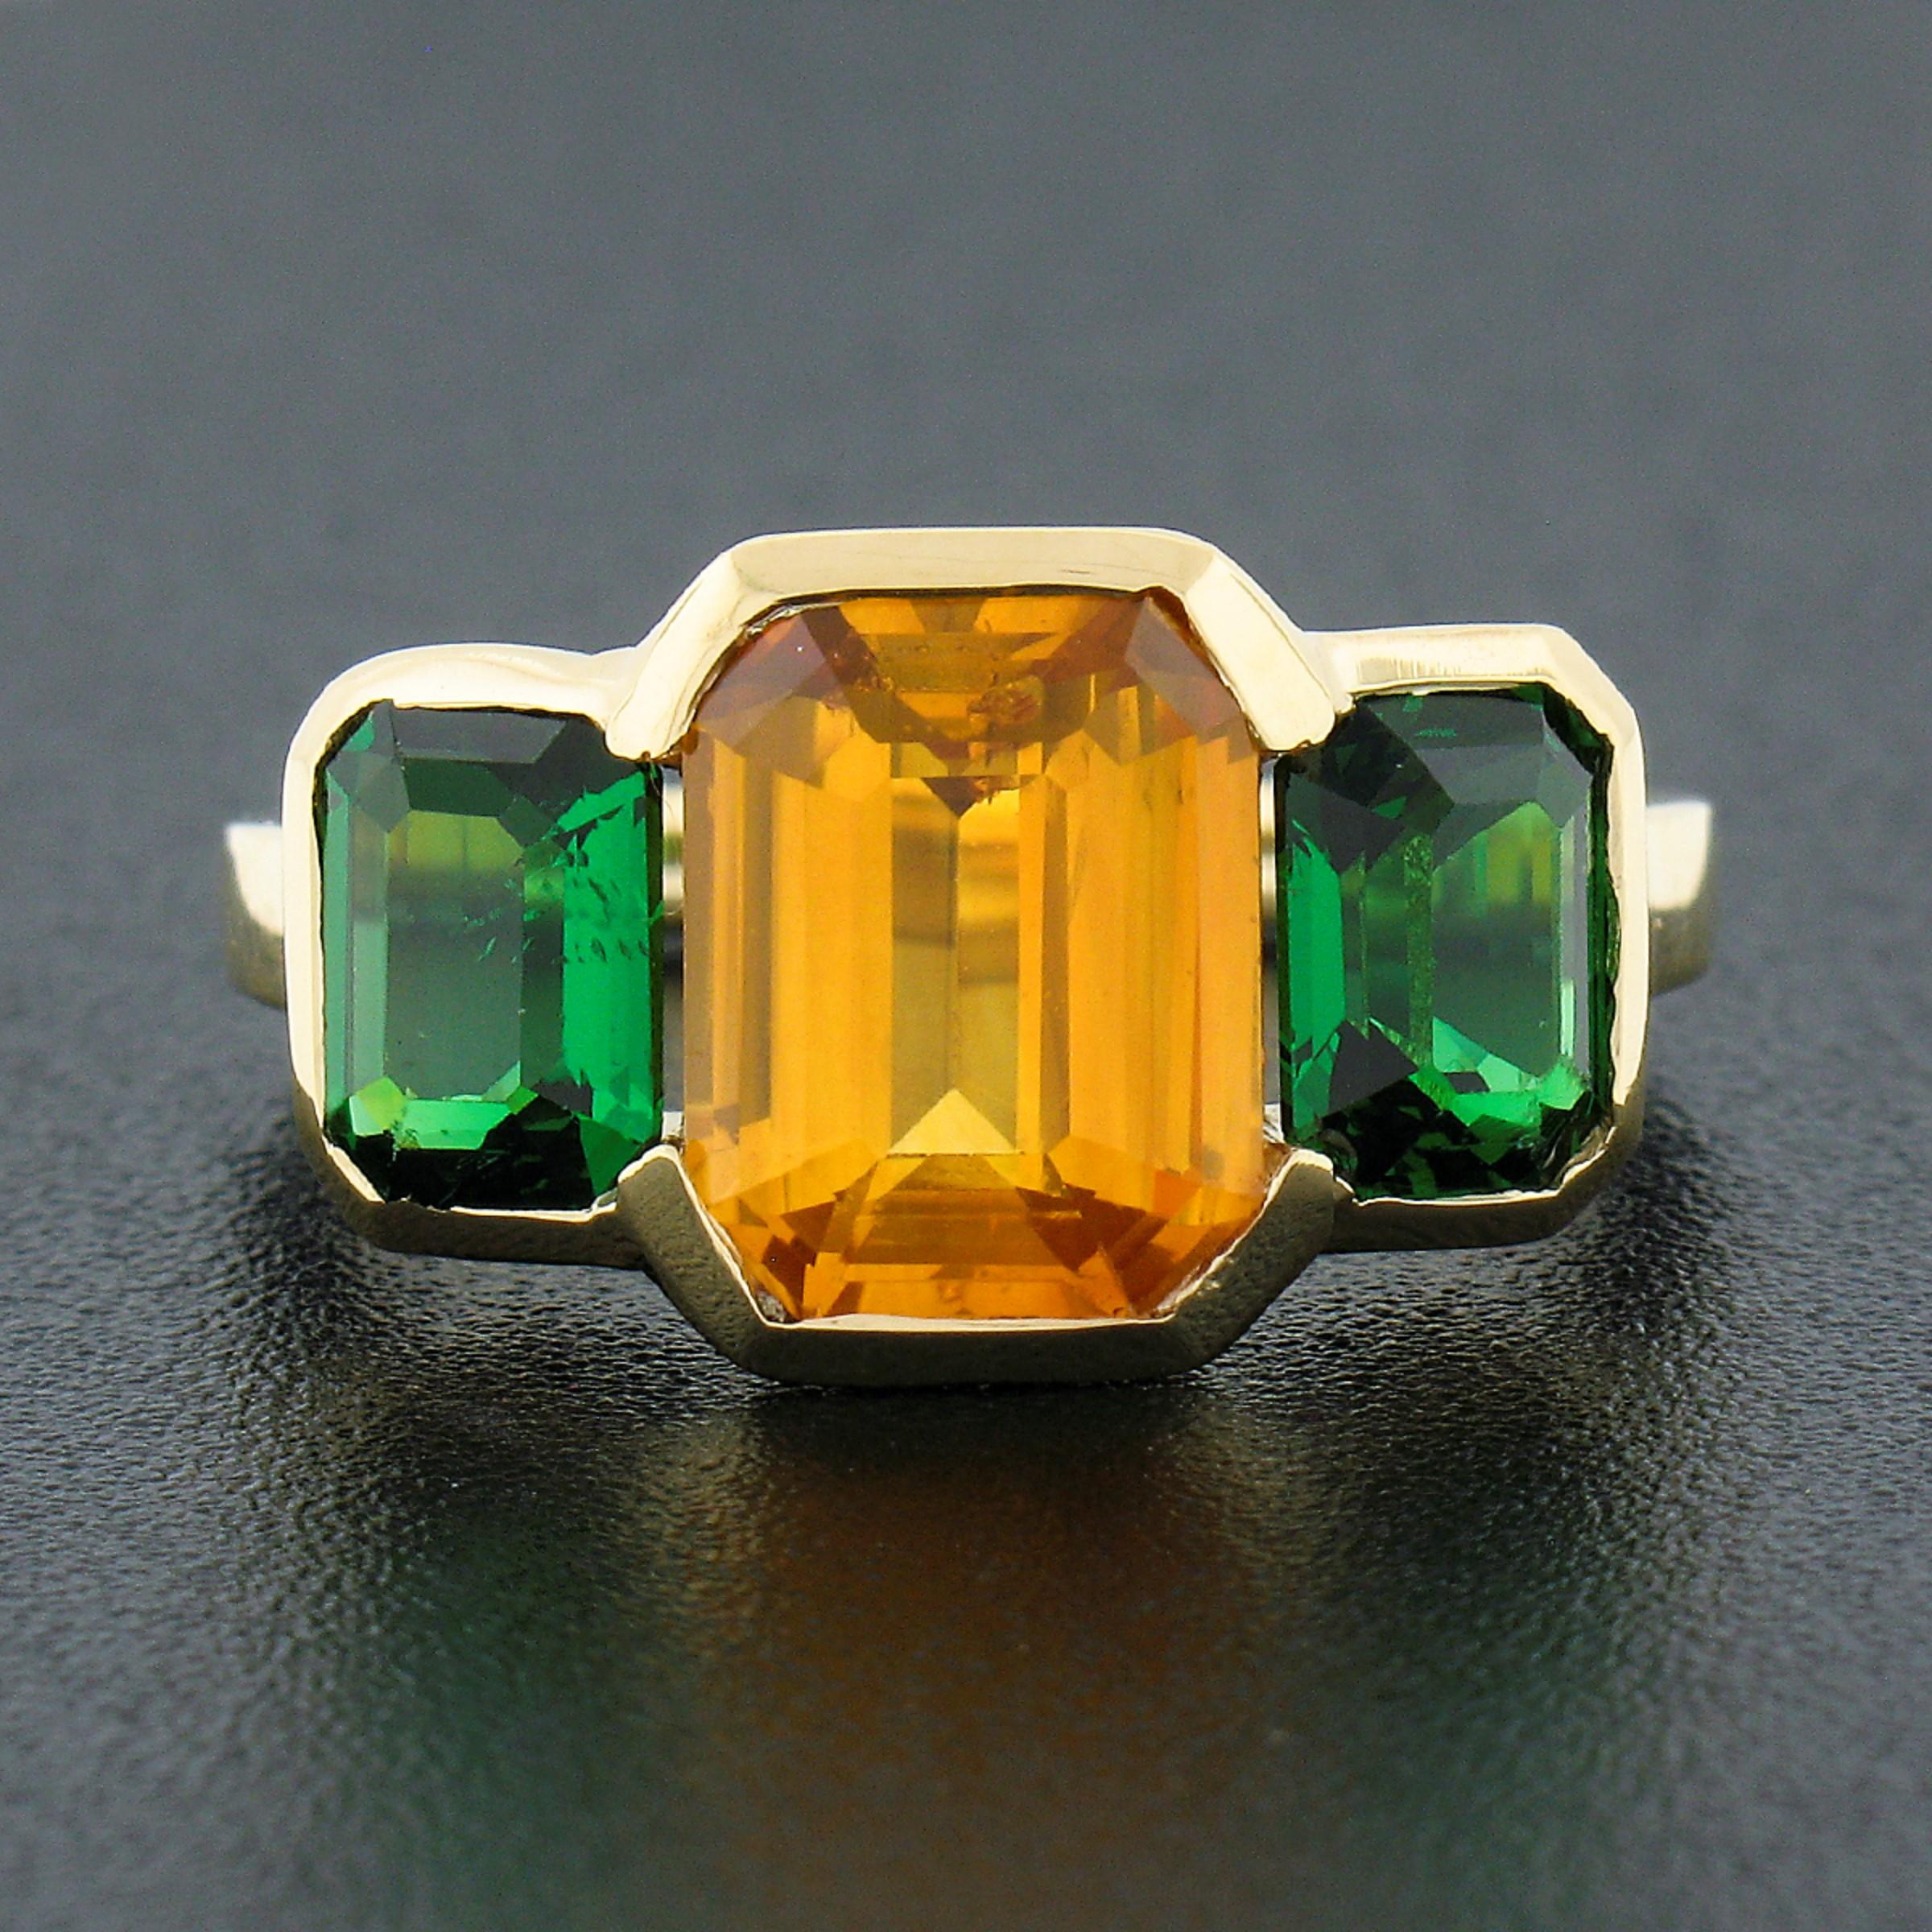 Here we have a fancy and truly magnificent yellow sapphire and green tsavorite cocktail ring crafted in solid 18k yellow gold. The ring features a natural, GIA certified, emerald cut natural yellow sapphire that weighs exactly 3.02 carats and is